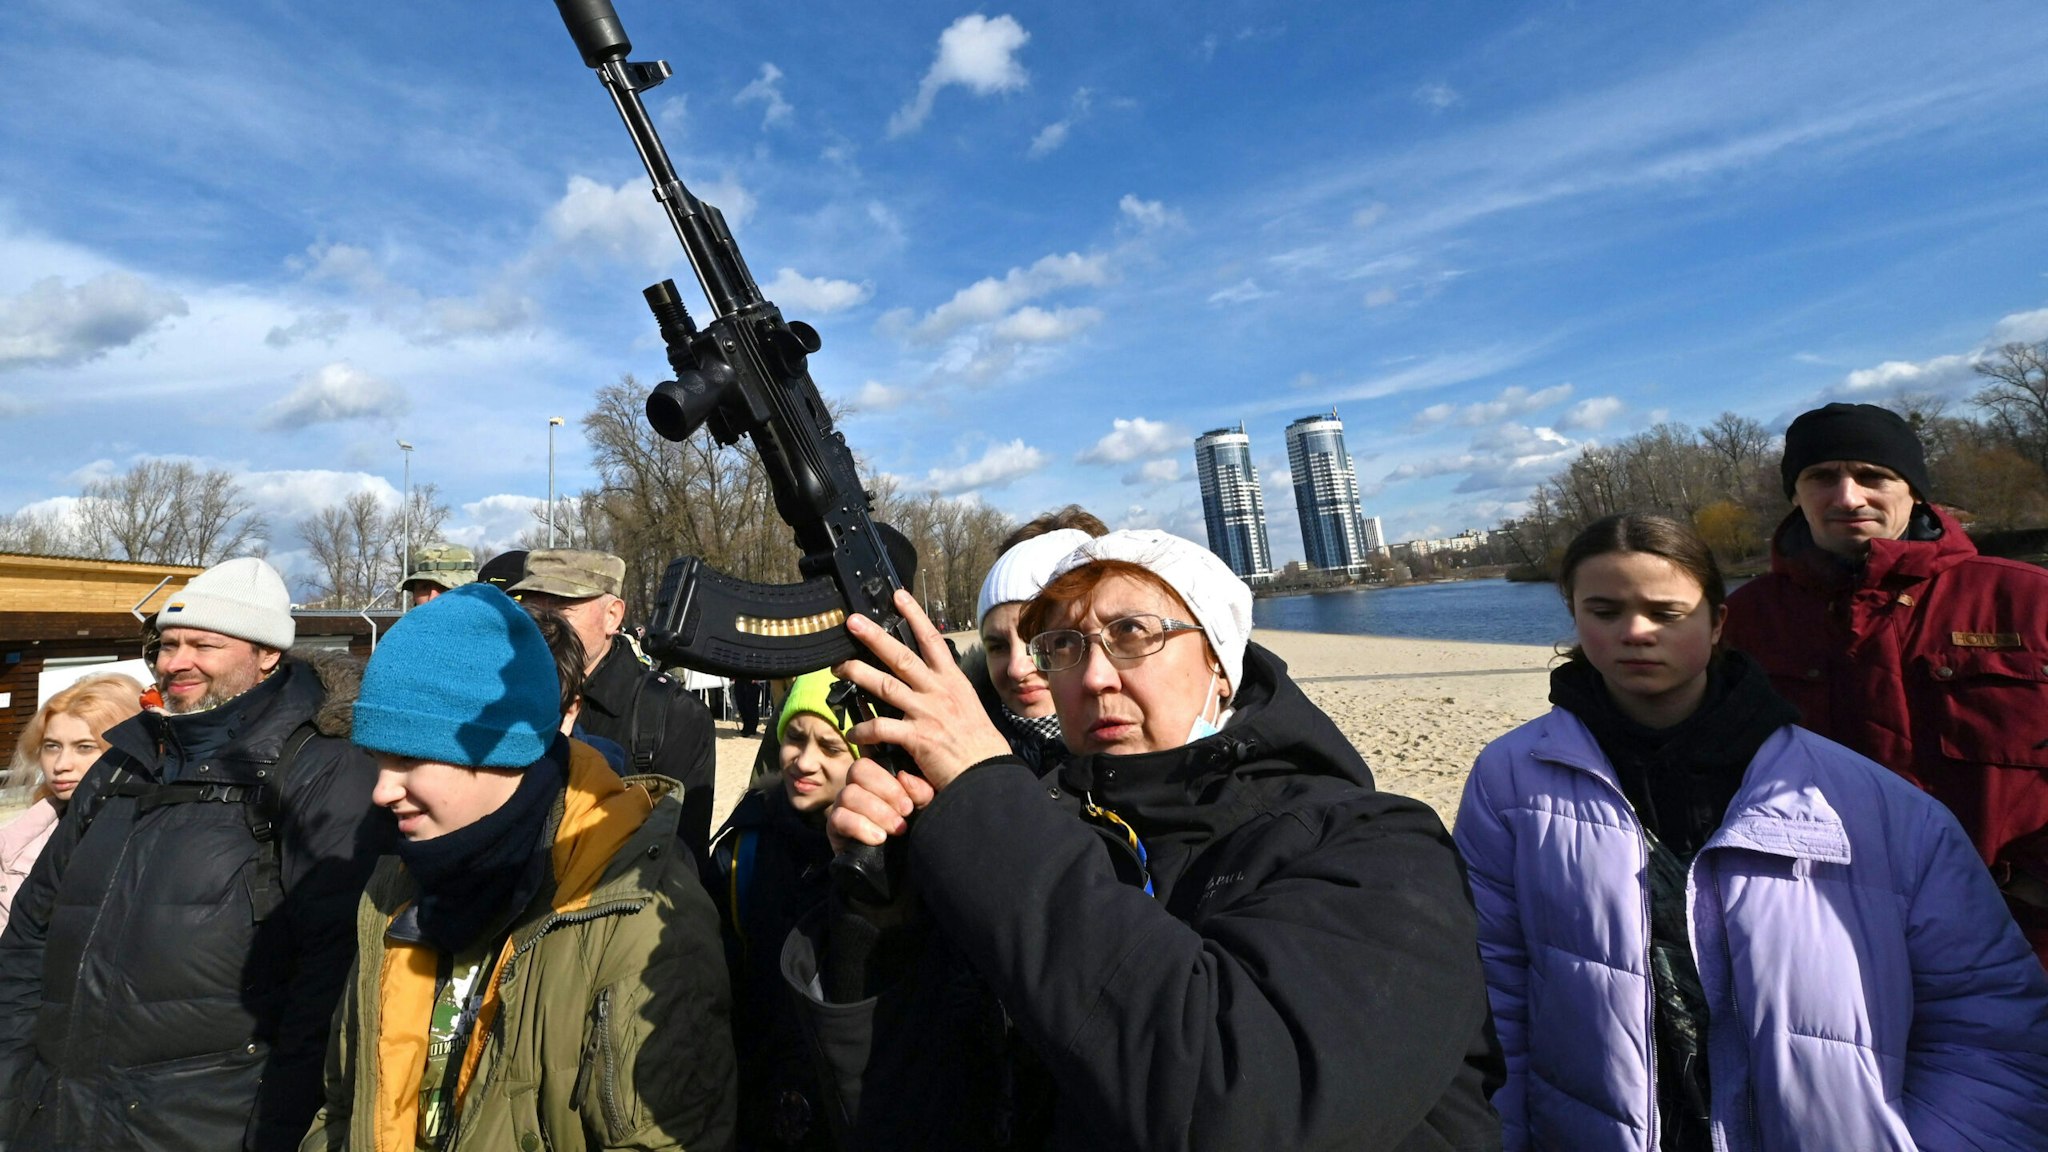 TOPSHOT - Residents attend an open training organised for civilians by war veterans and volunteers who teach the basic weapons handling and first aid on one of Kiyv's city beaches on February 20, 2022, amid soaring tensions with Russia.